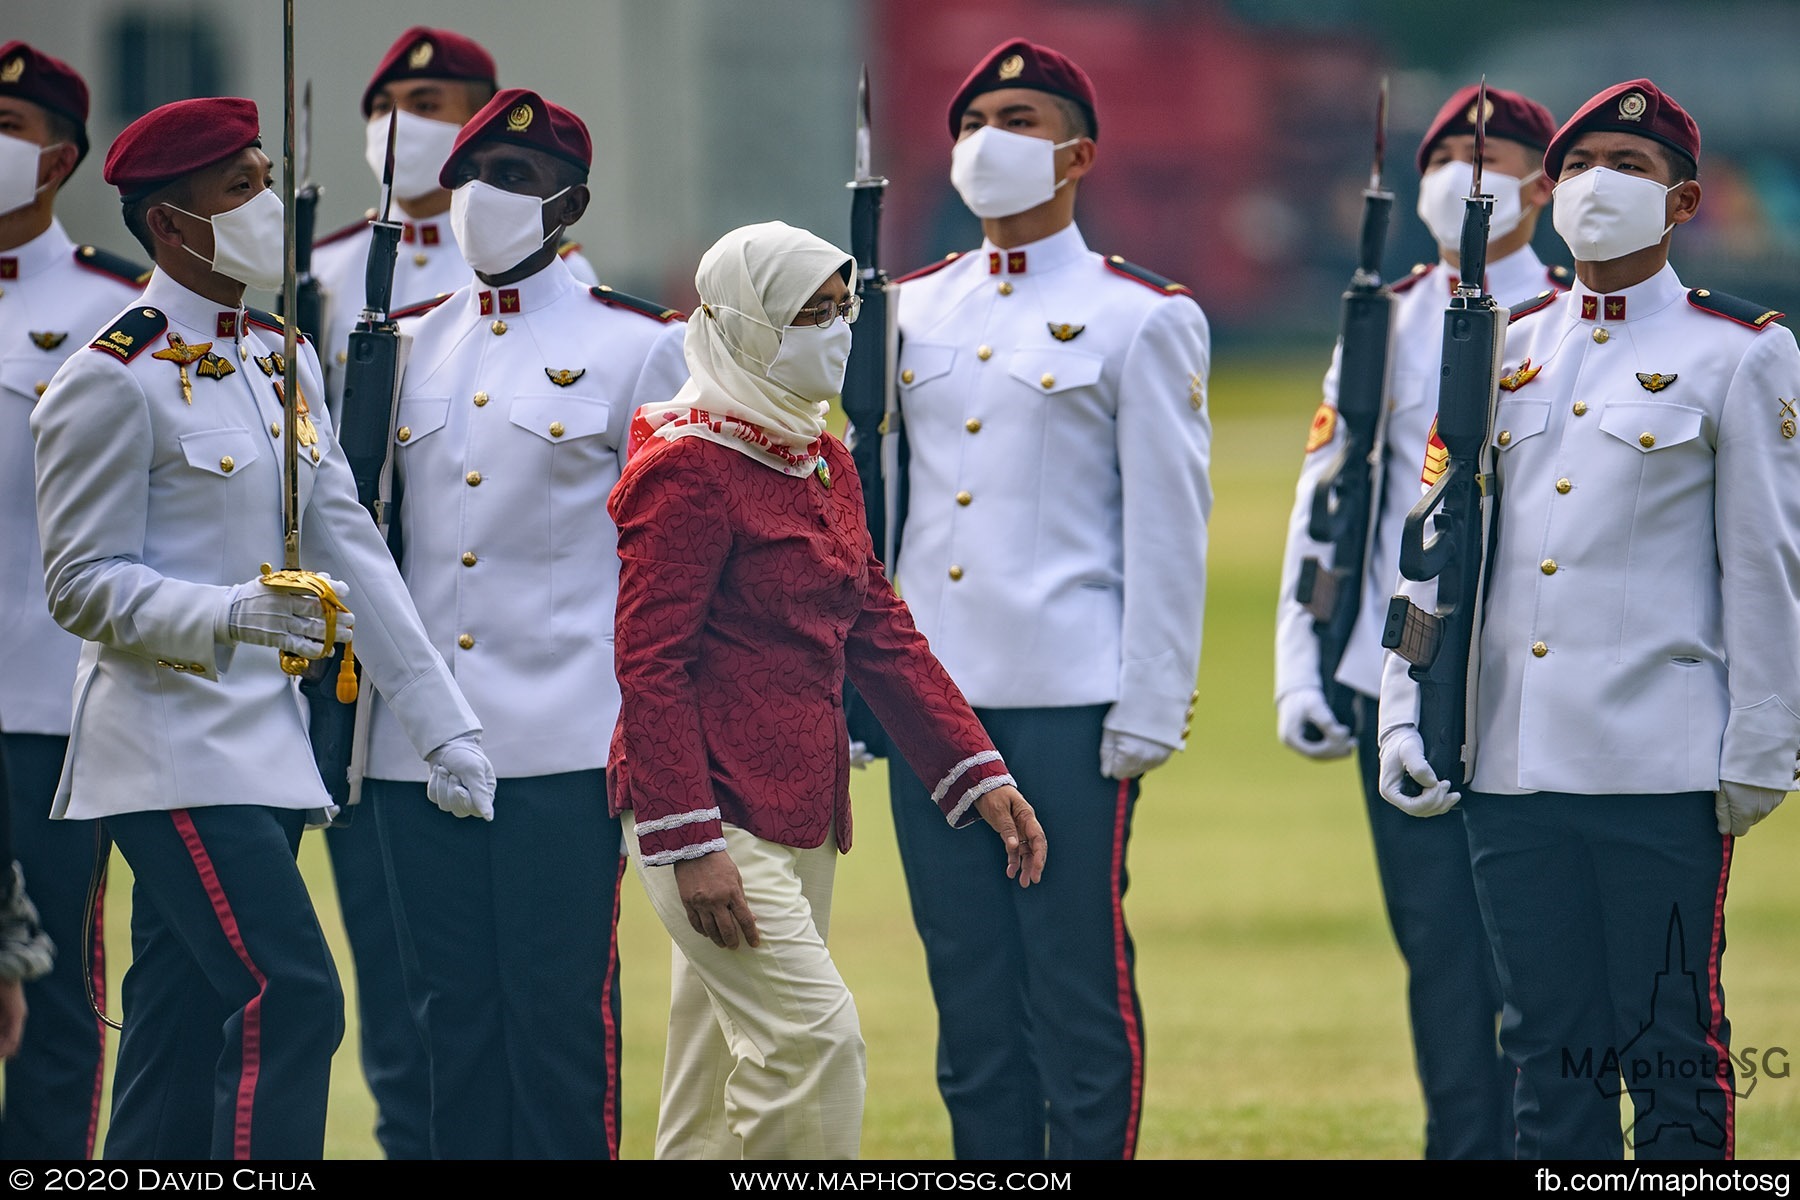 Madam President Halimah Yacob inspects the Guard of Honor President contingents.